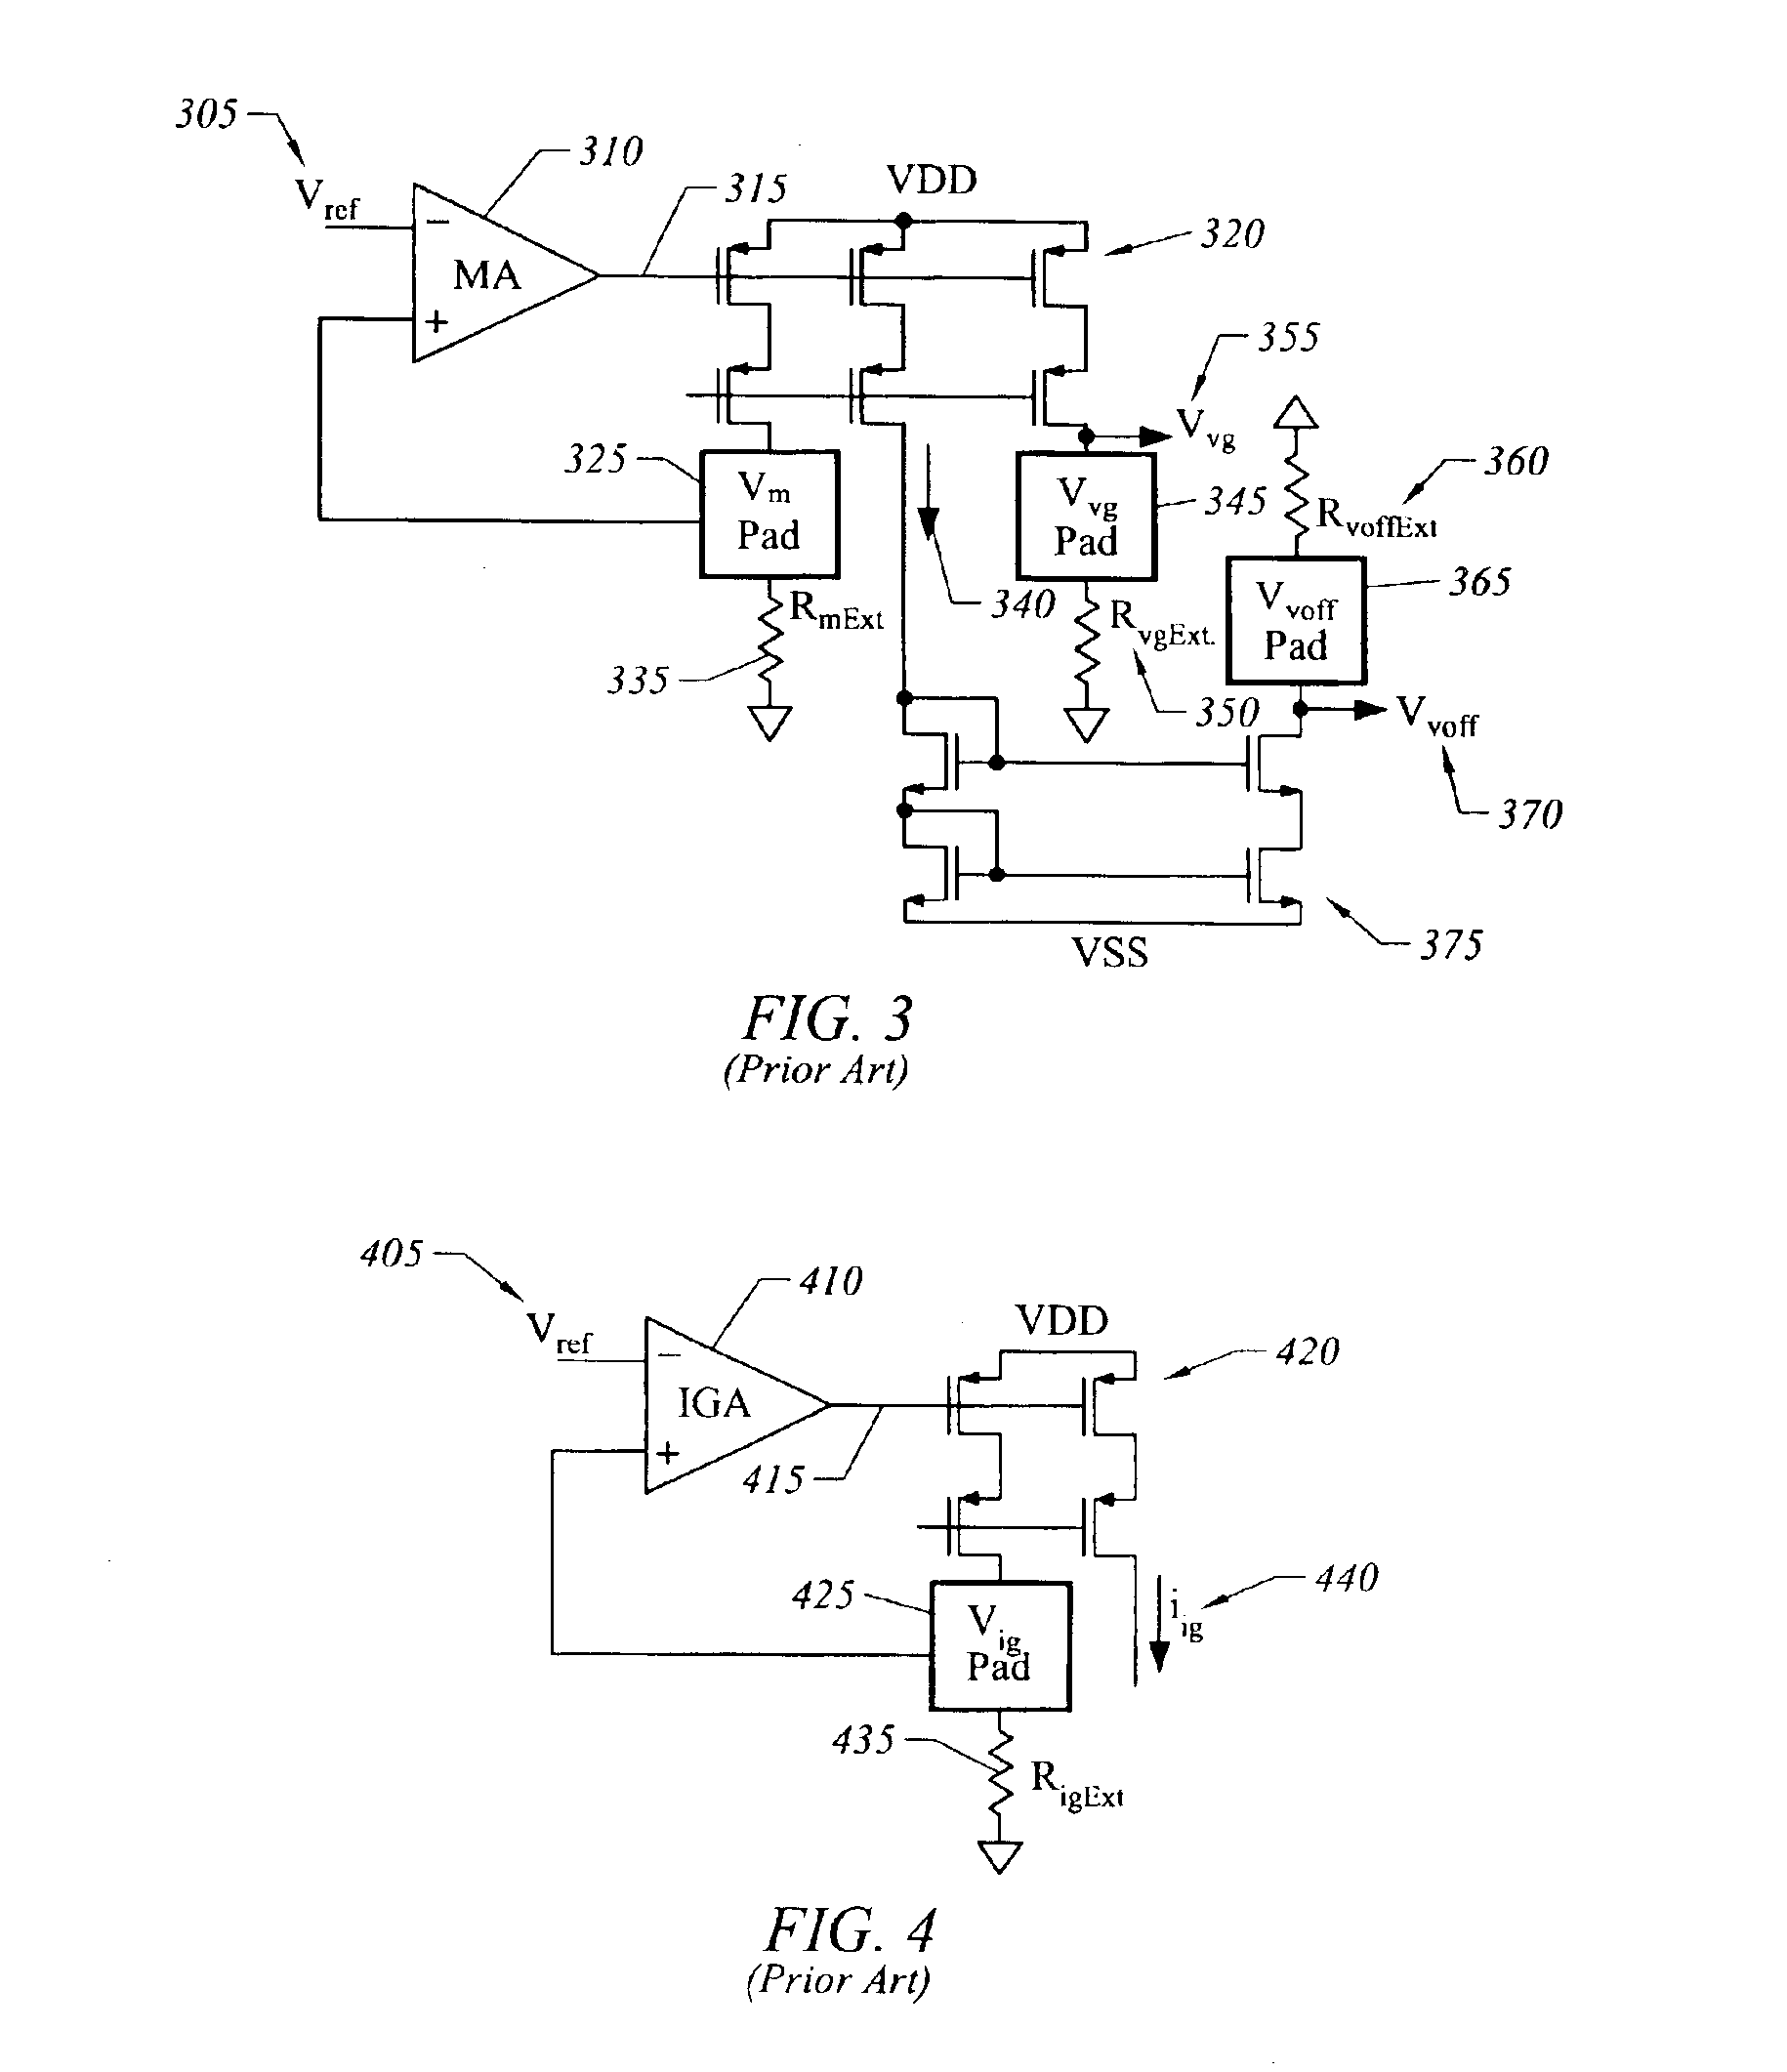 Digital adjustment of gain and offset for digital to analog converters